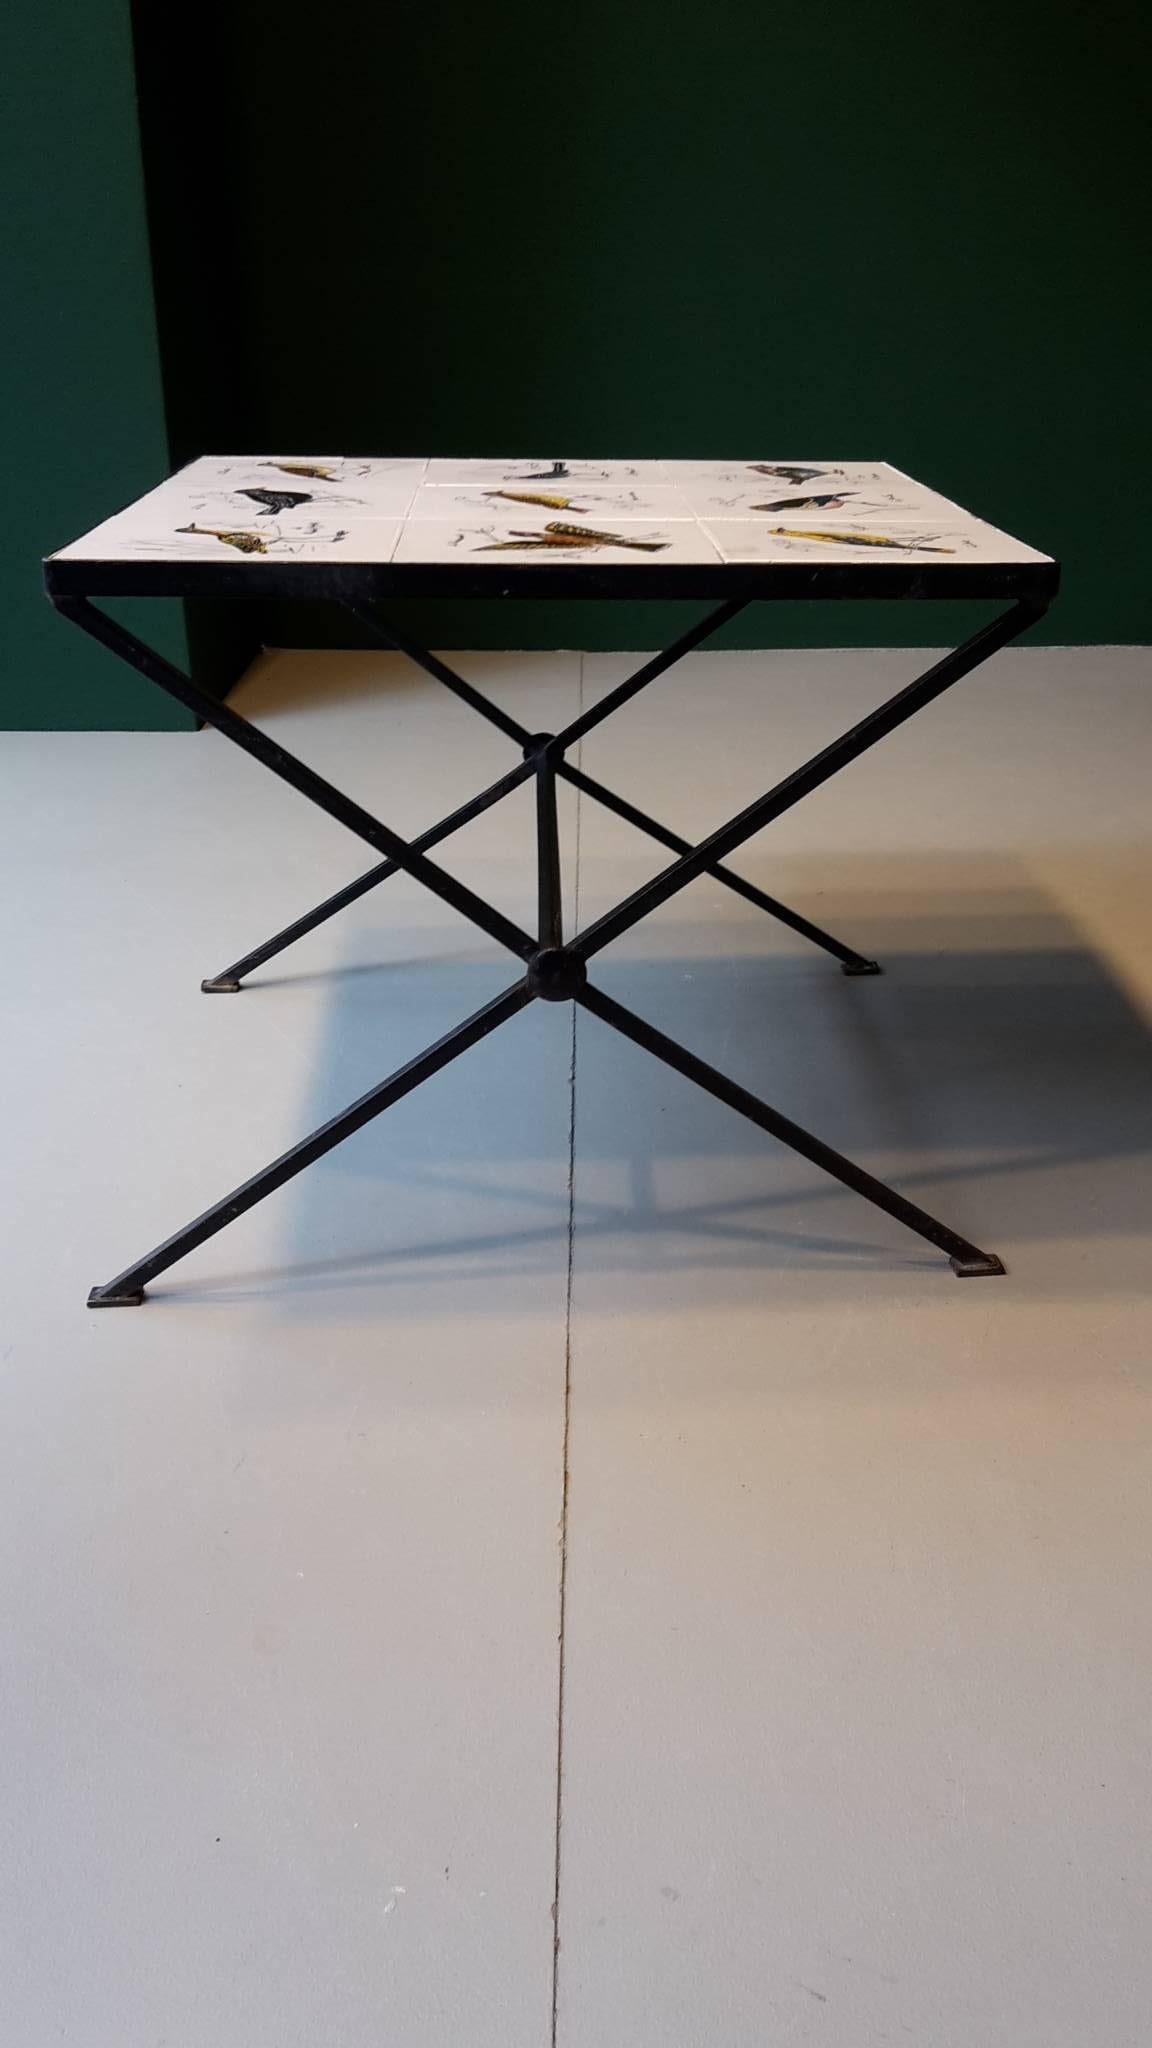 20th century French coffee table made of metal and ceramic tiles with painted birds, 1960s.